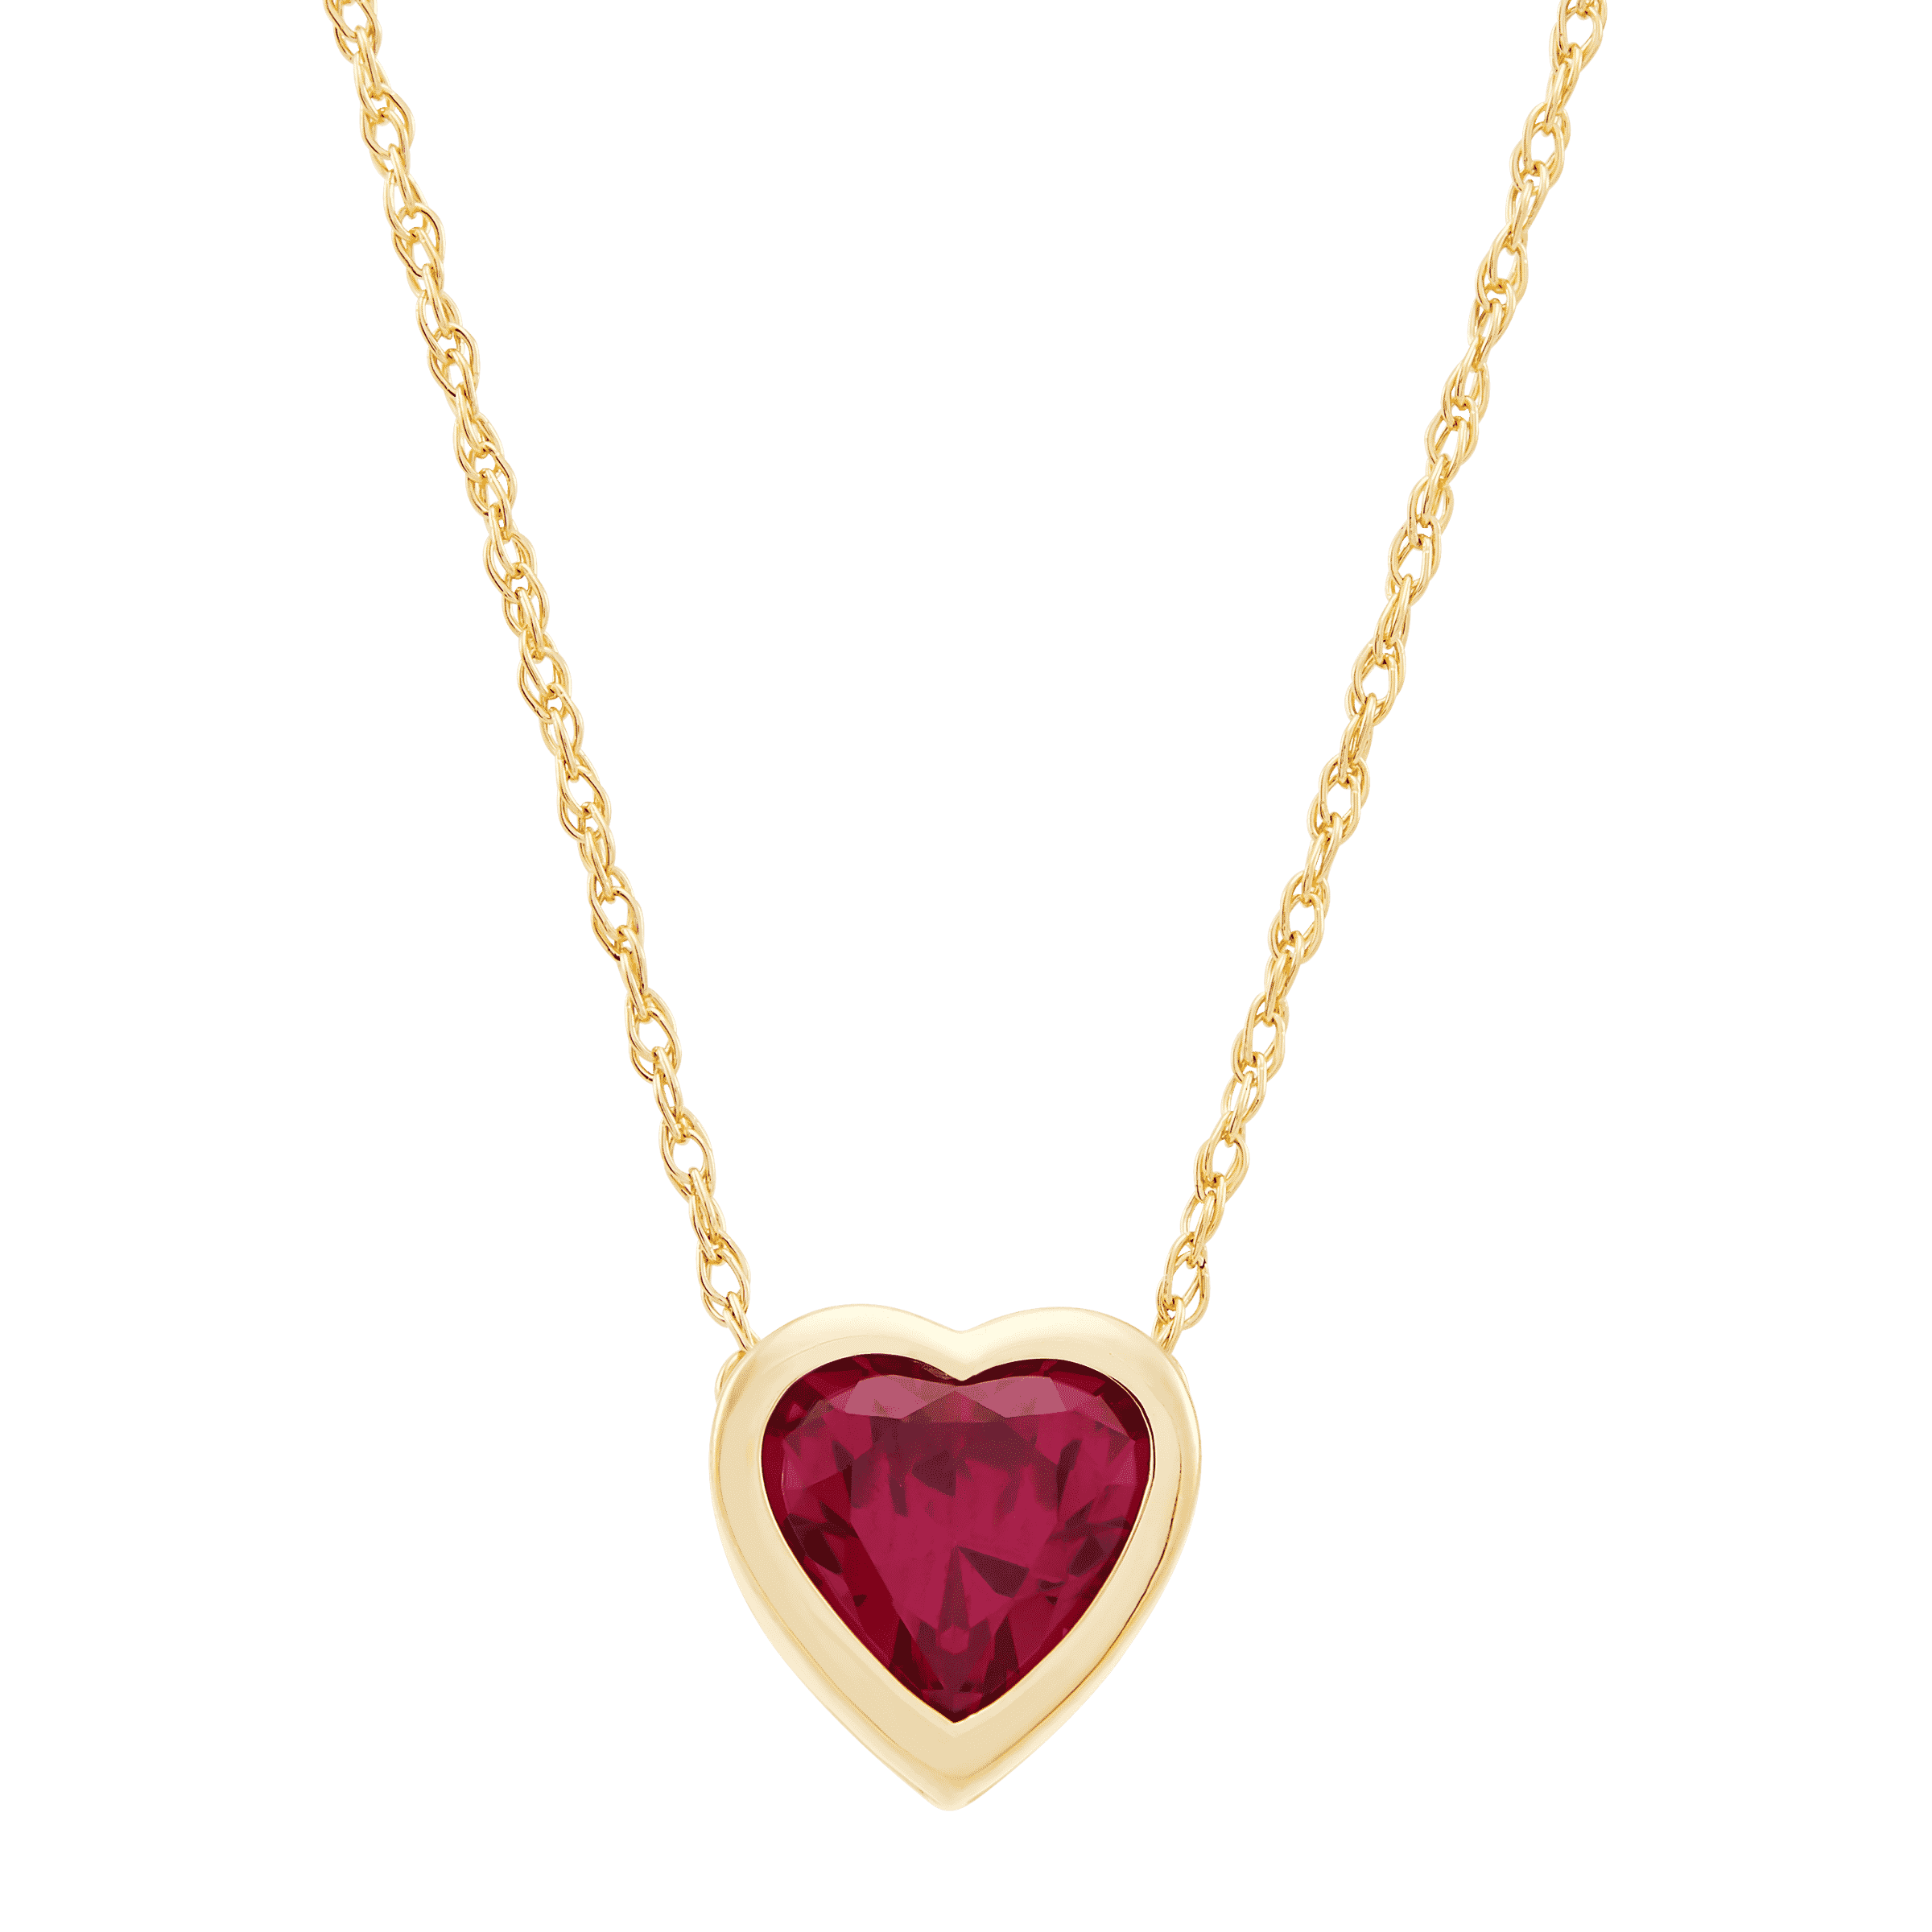 The Ruby Heart Necklace SPARROW | vlr.eng.br